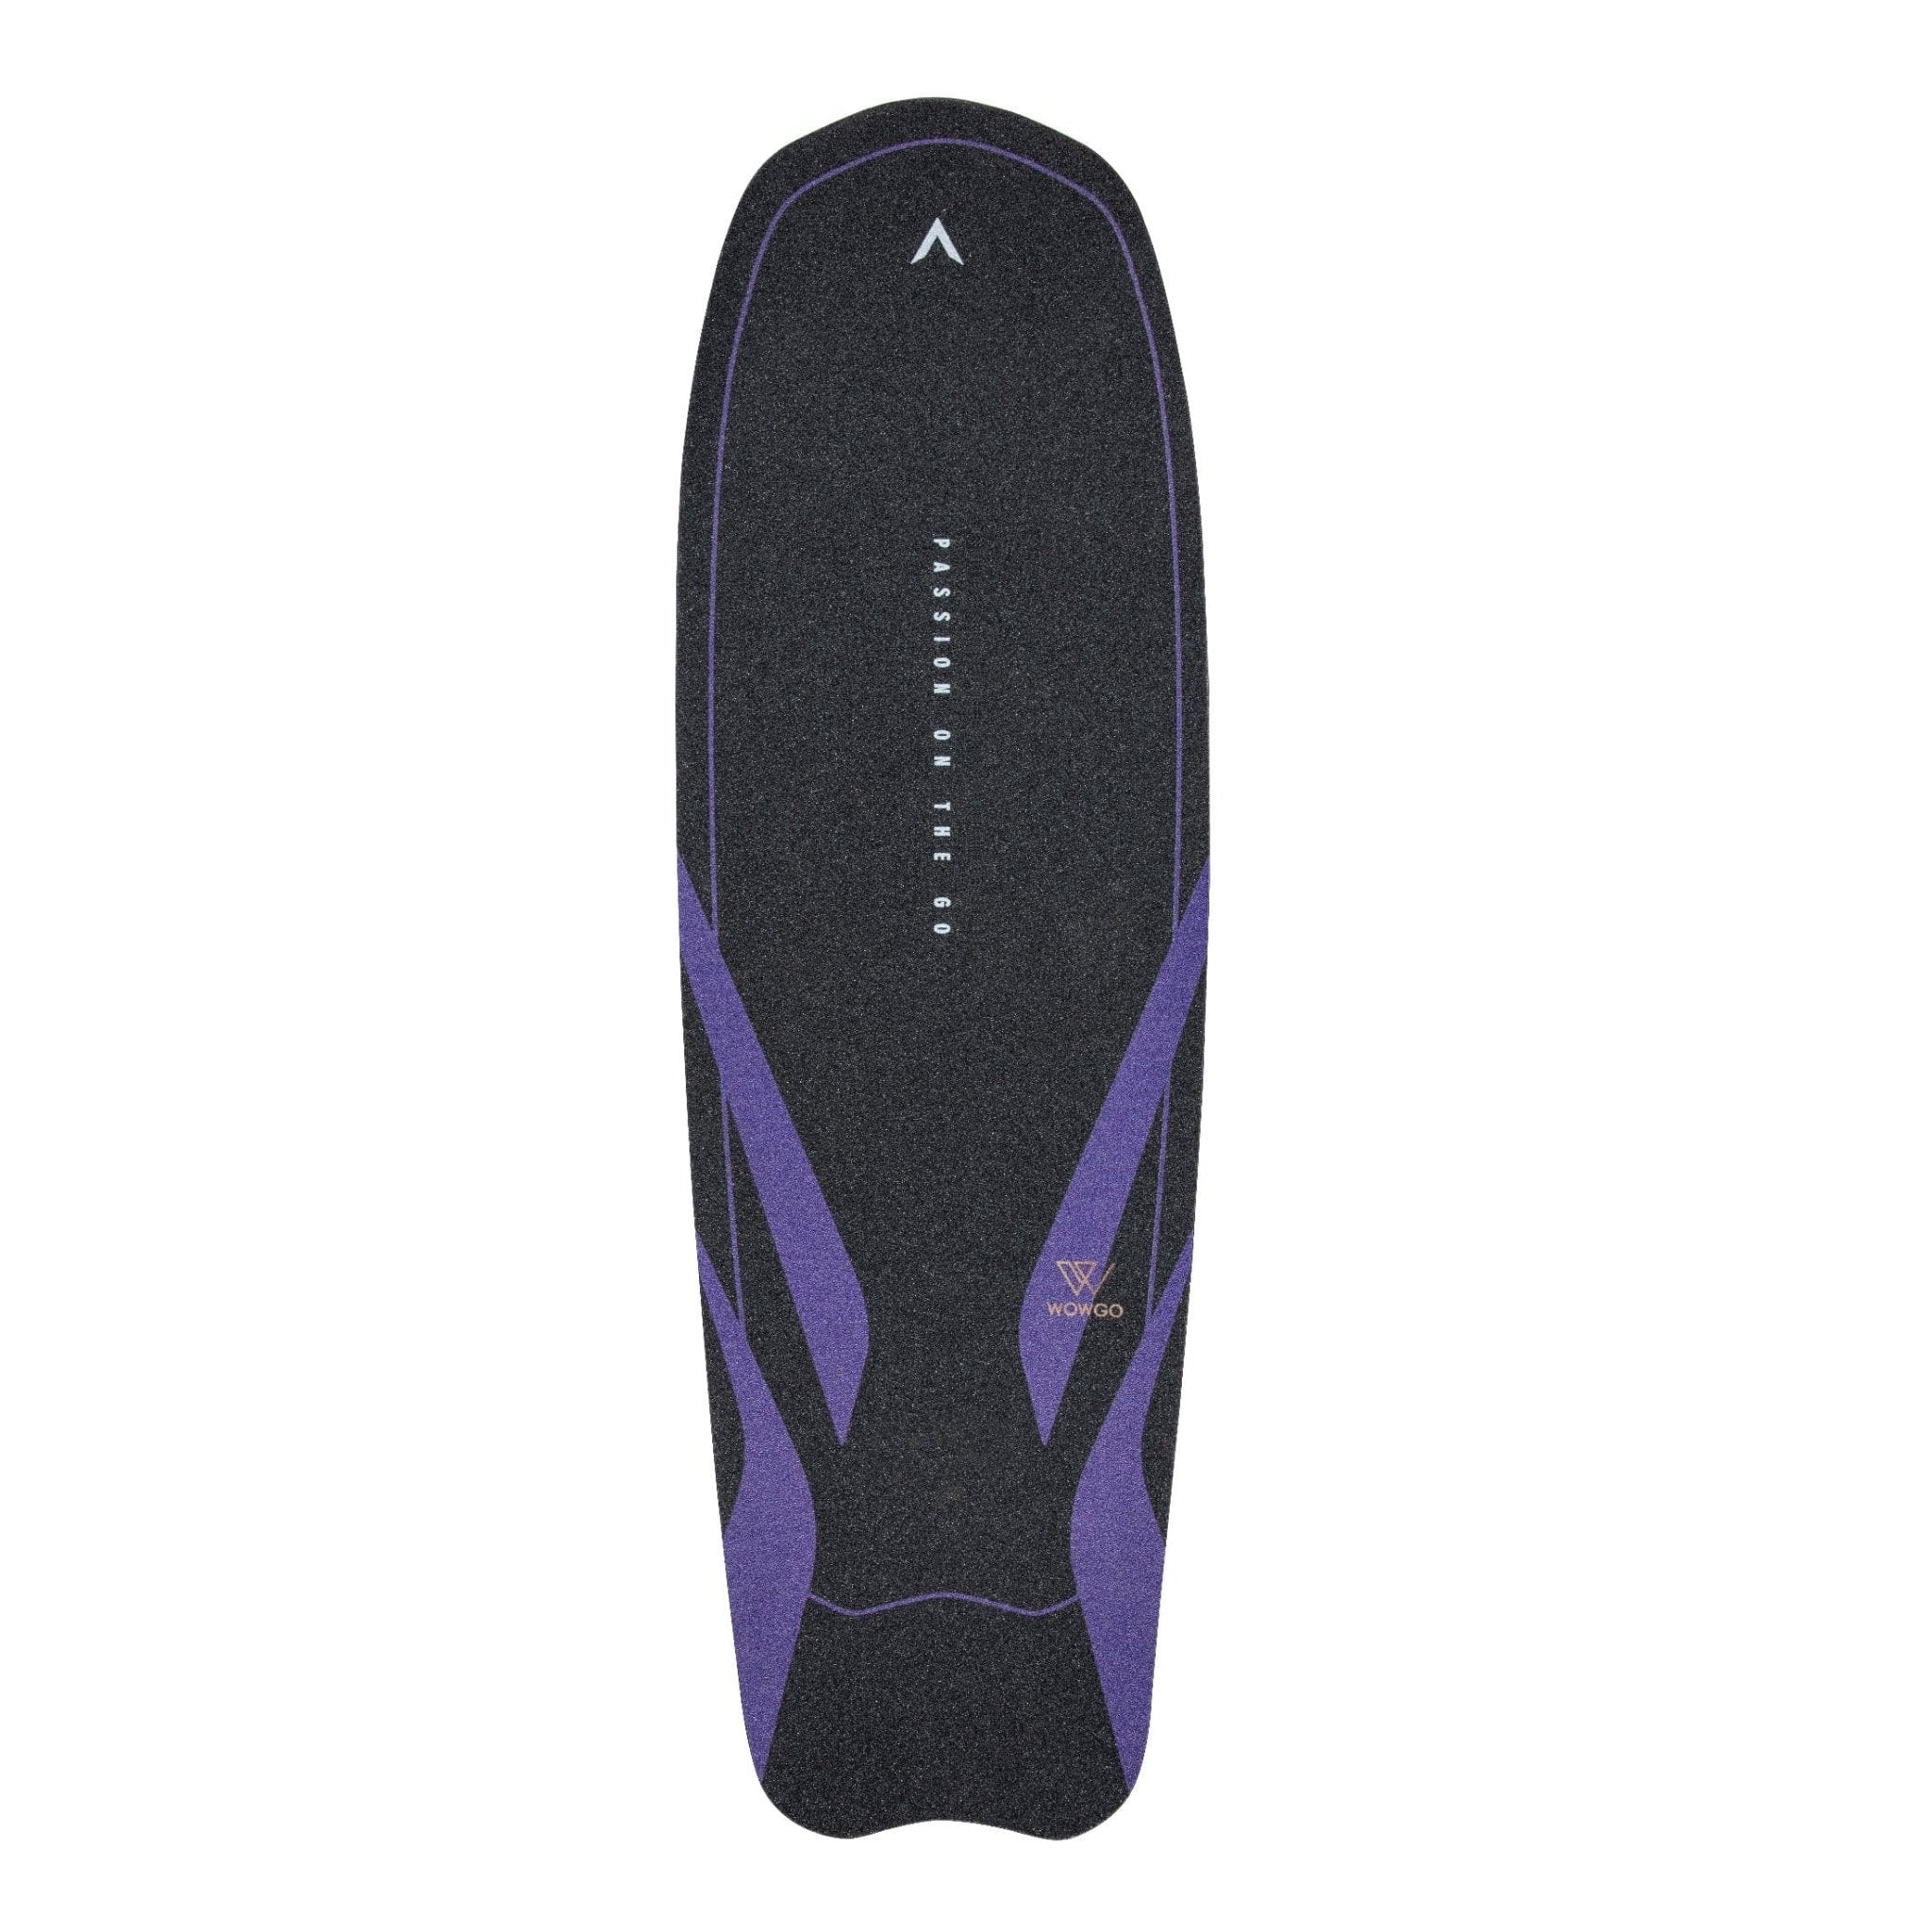 Electric Skateboard Safety Grip Tape‎ - WOWGO BOARD Electric Skateboard ESK8 Electric Longboard